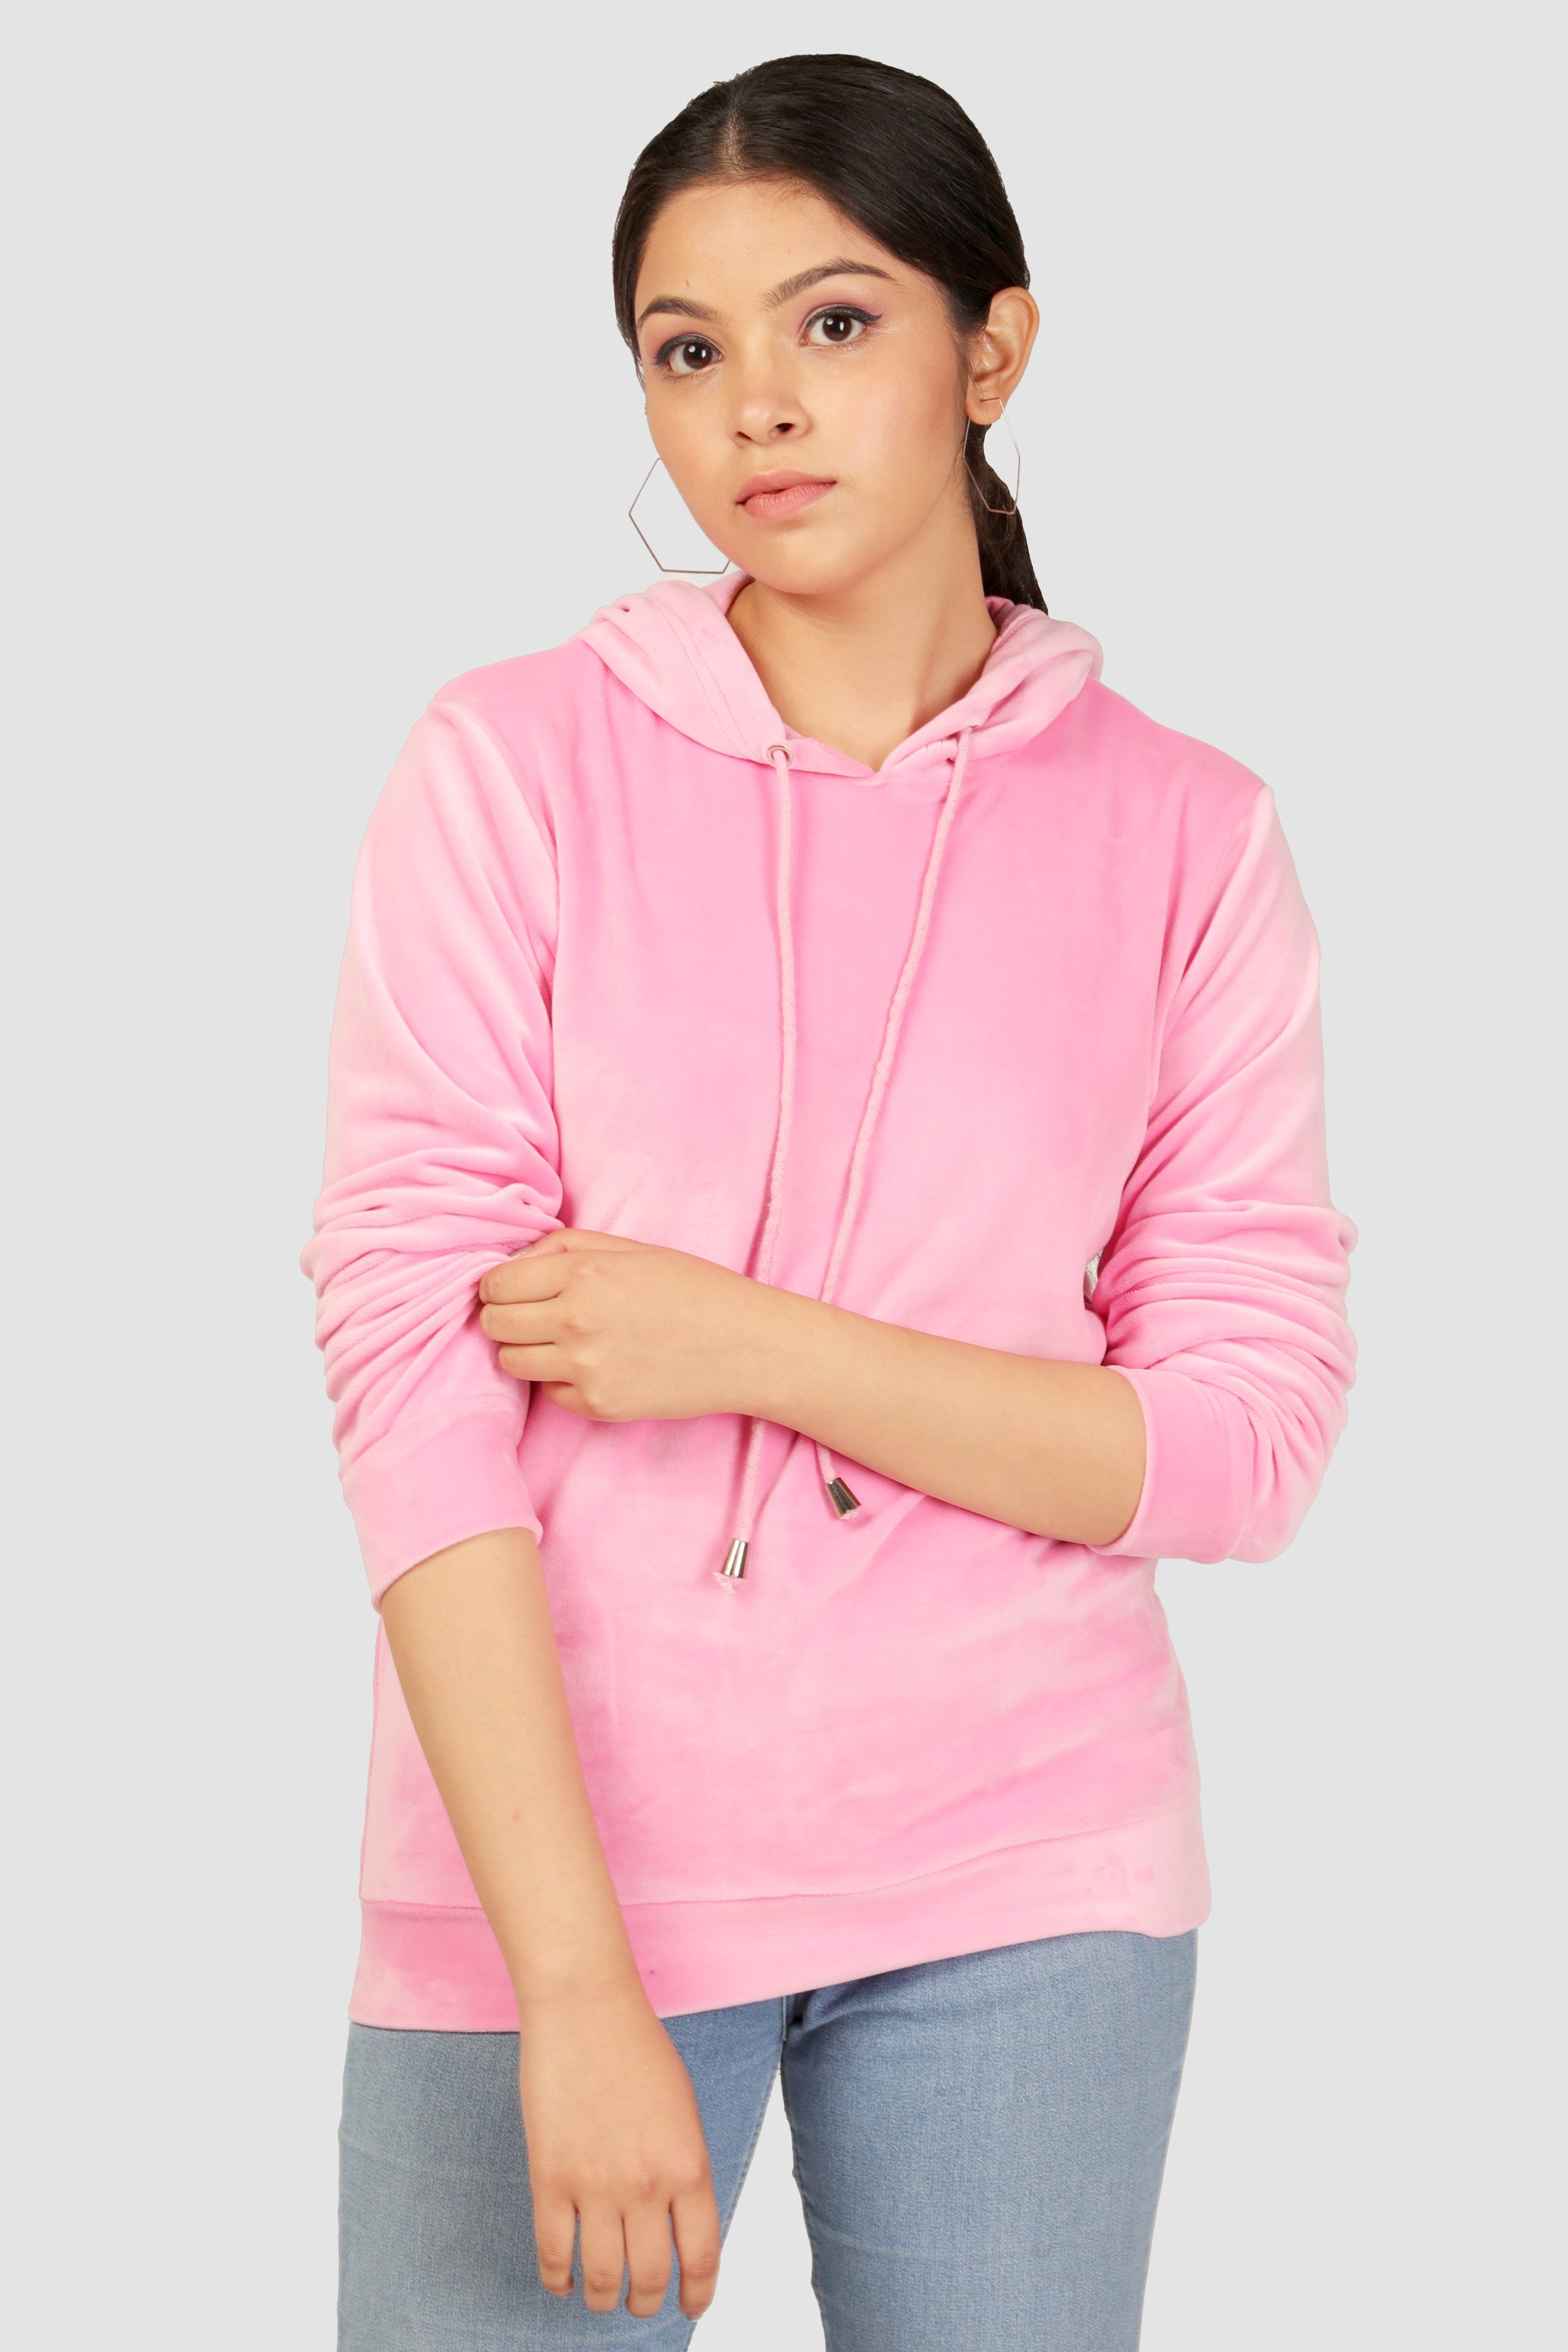 WALLY - PINK VELOUR SOLID WOMENS HOODIE